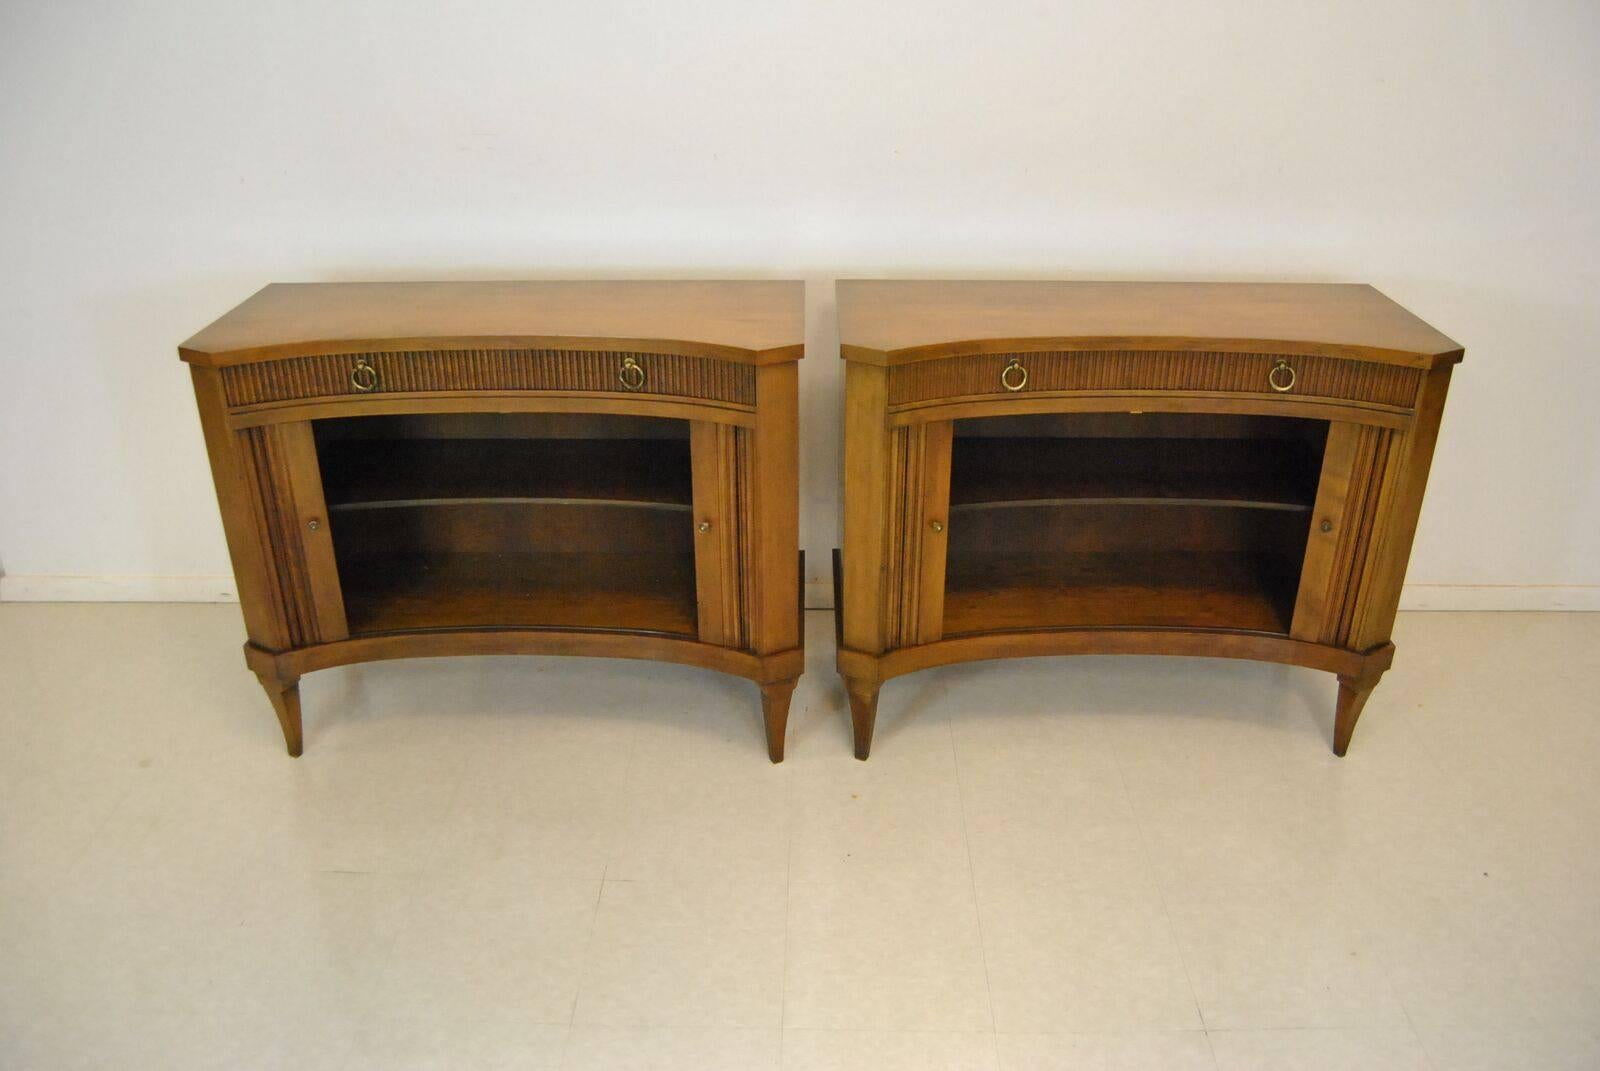 American Pair of Midcentury Regency Style Curved Front Tambour Door Chests